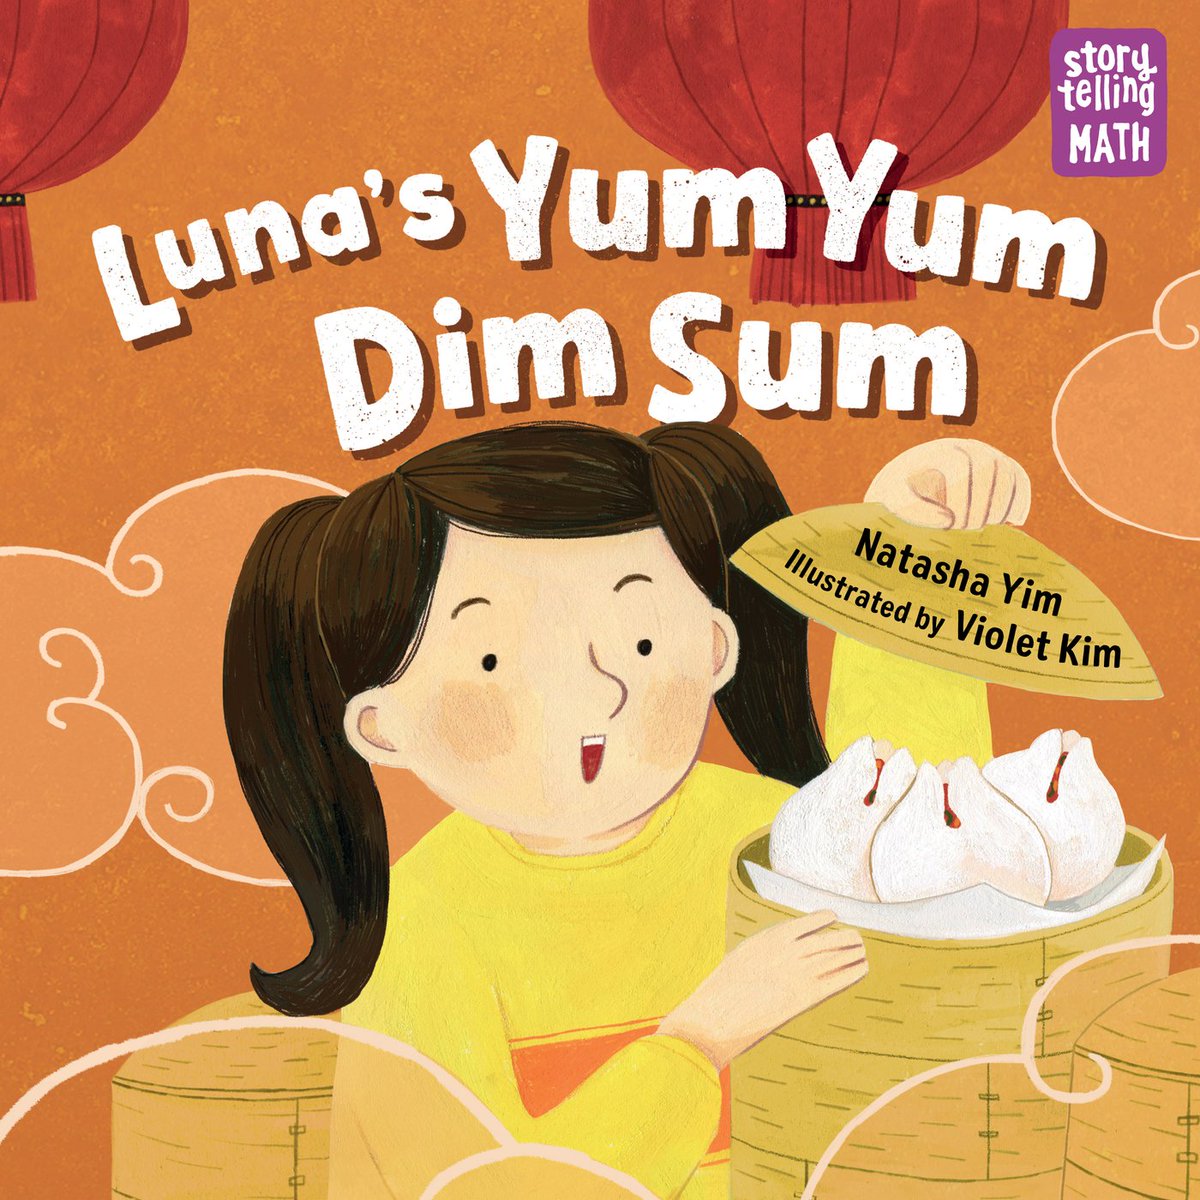 It’s #Children’sBookWeek! Have the young ones in your life read these early math stories created by @charlesbridge in collaboration with TERC's Marlene Kliman. Get copies here: hubs.la/Q02tmmPN0